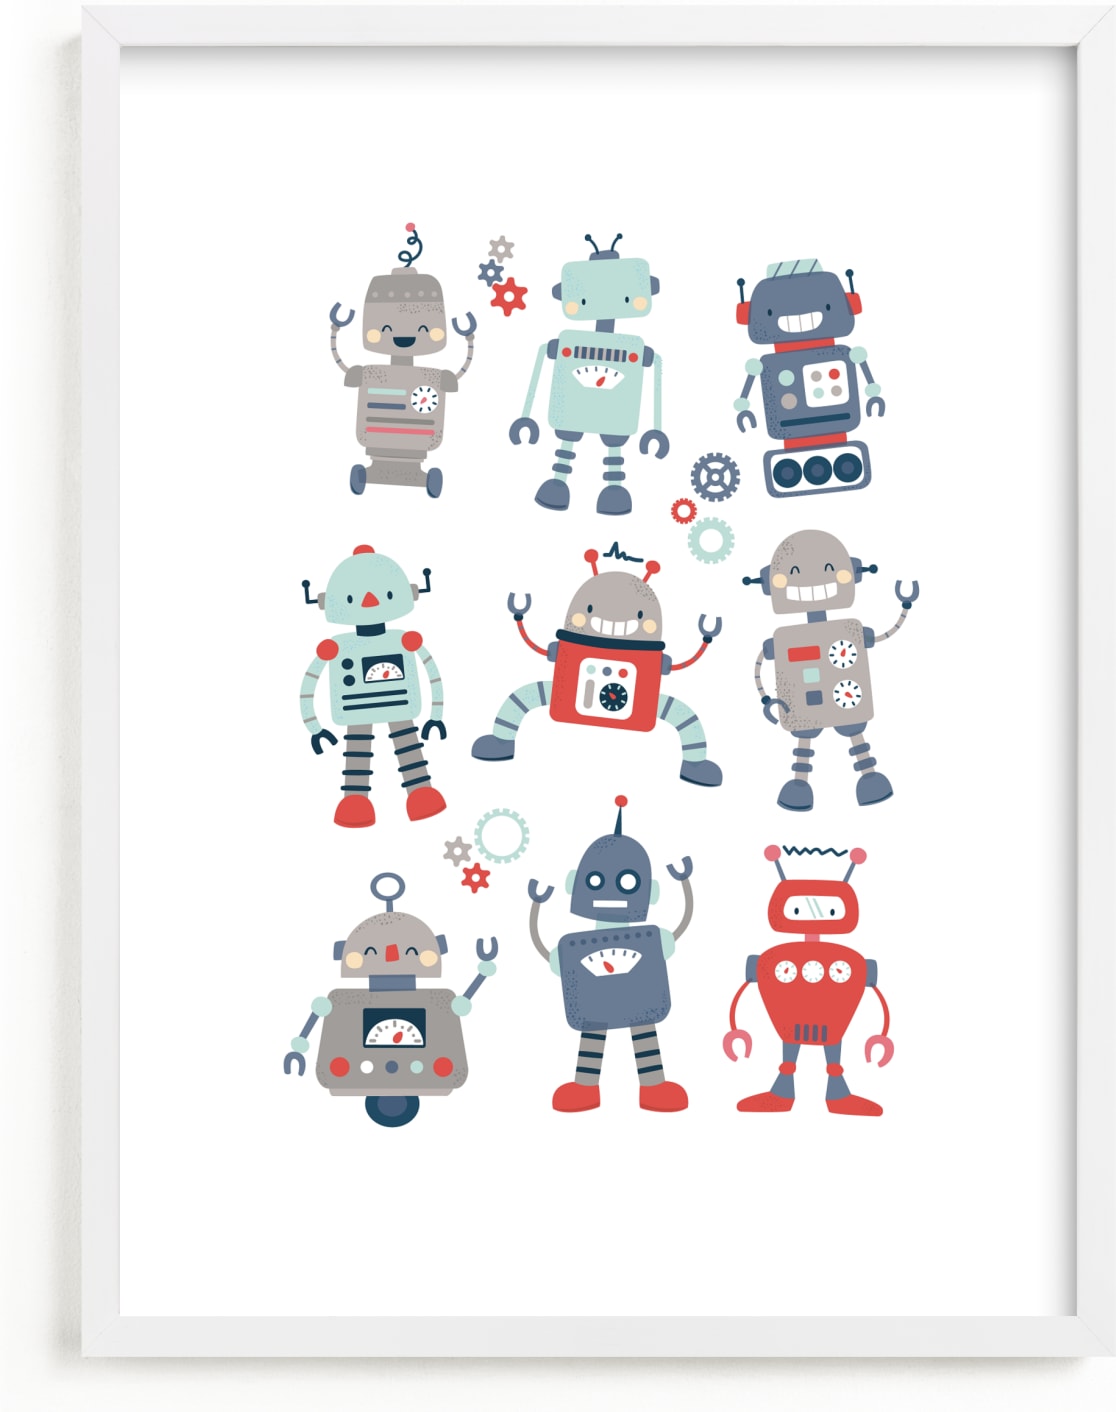 This is a blue kids wall art by peetie design called mr robot.